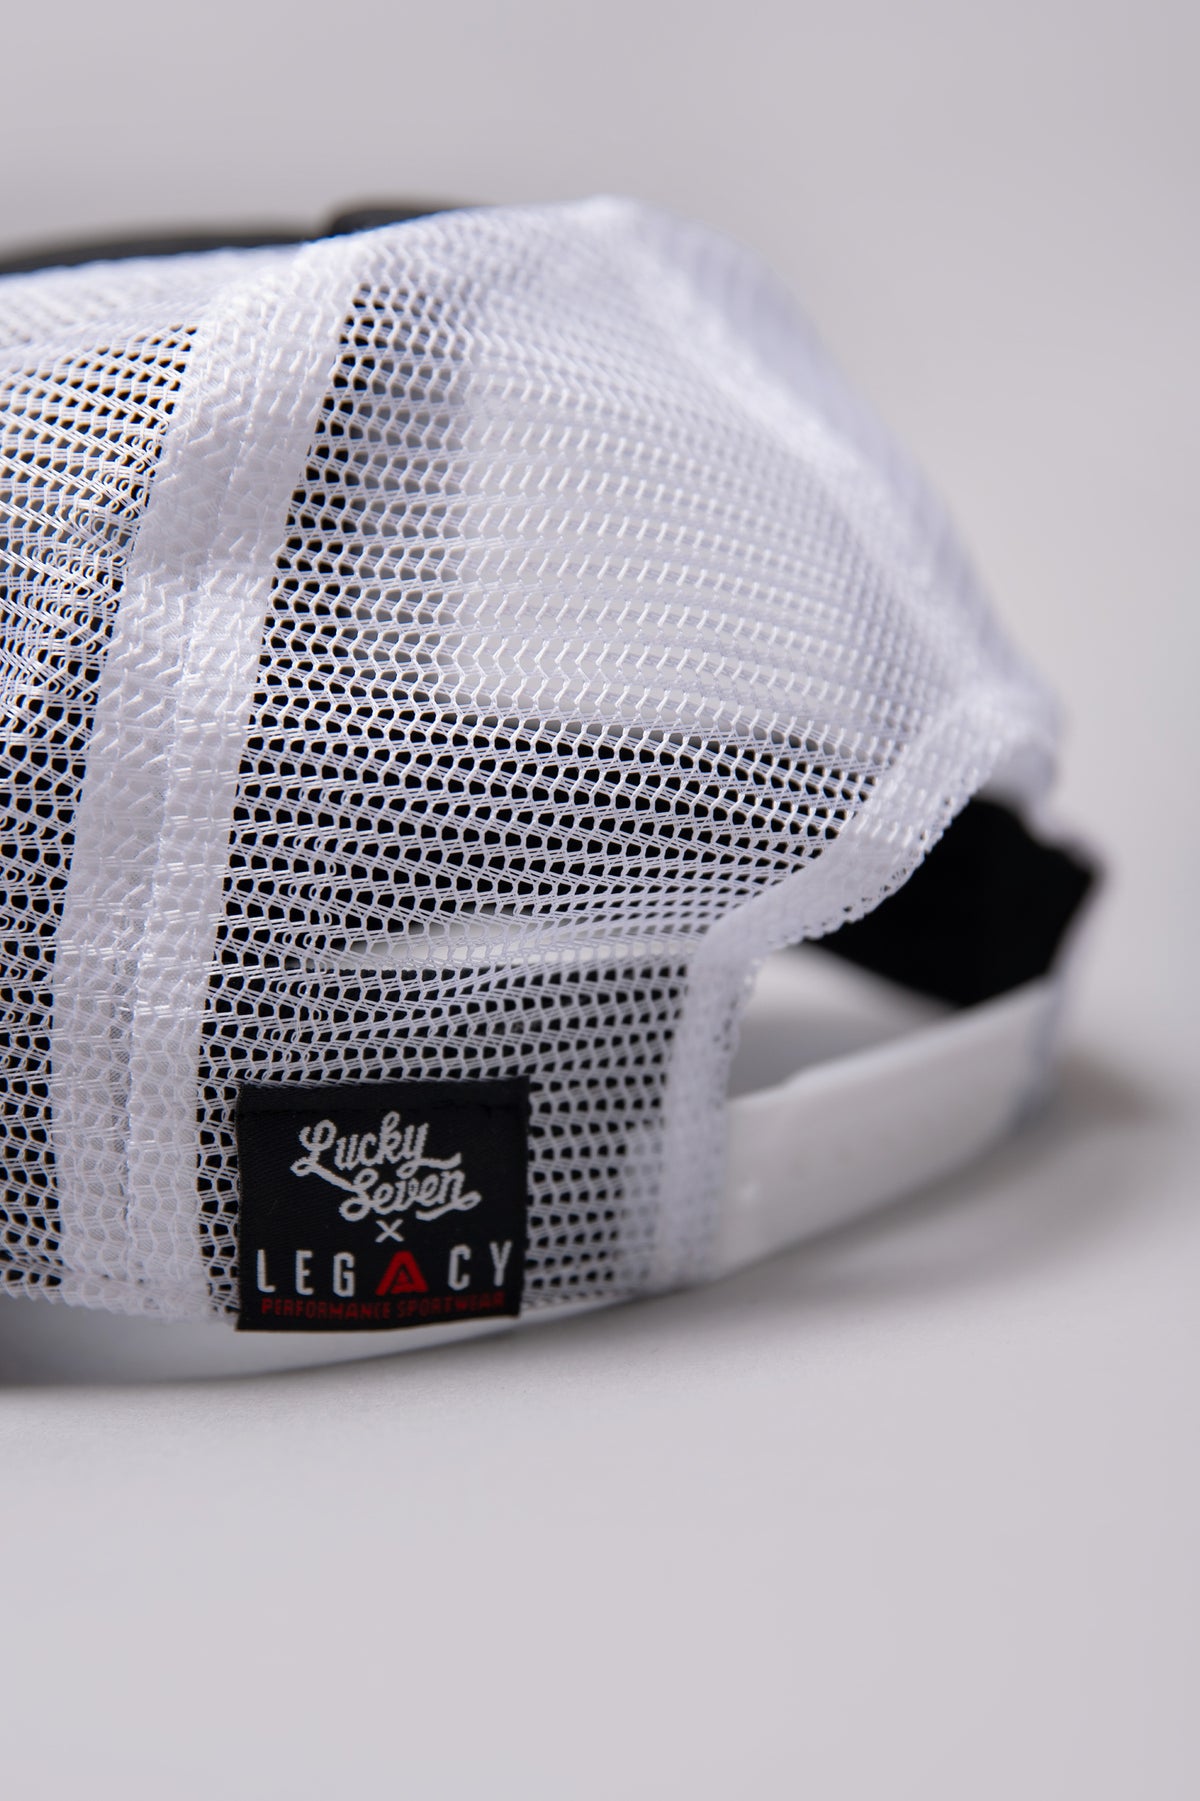 Legacy Trucker hat Black and White